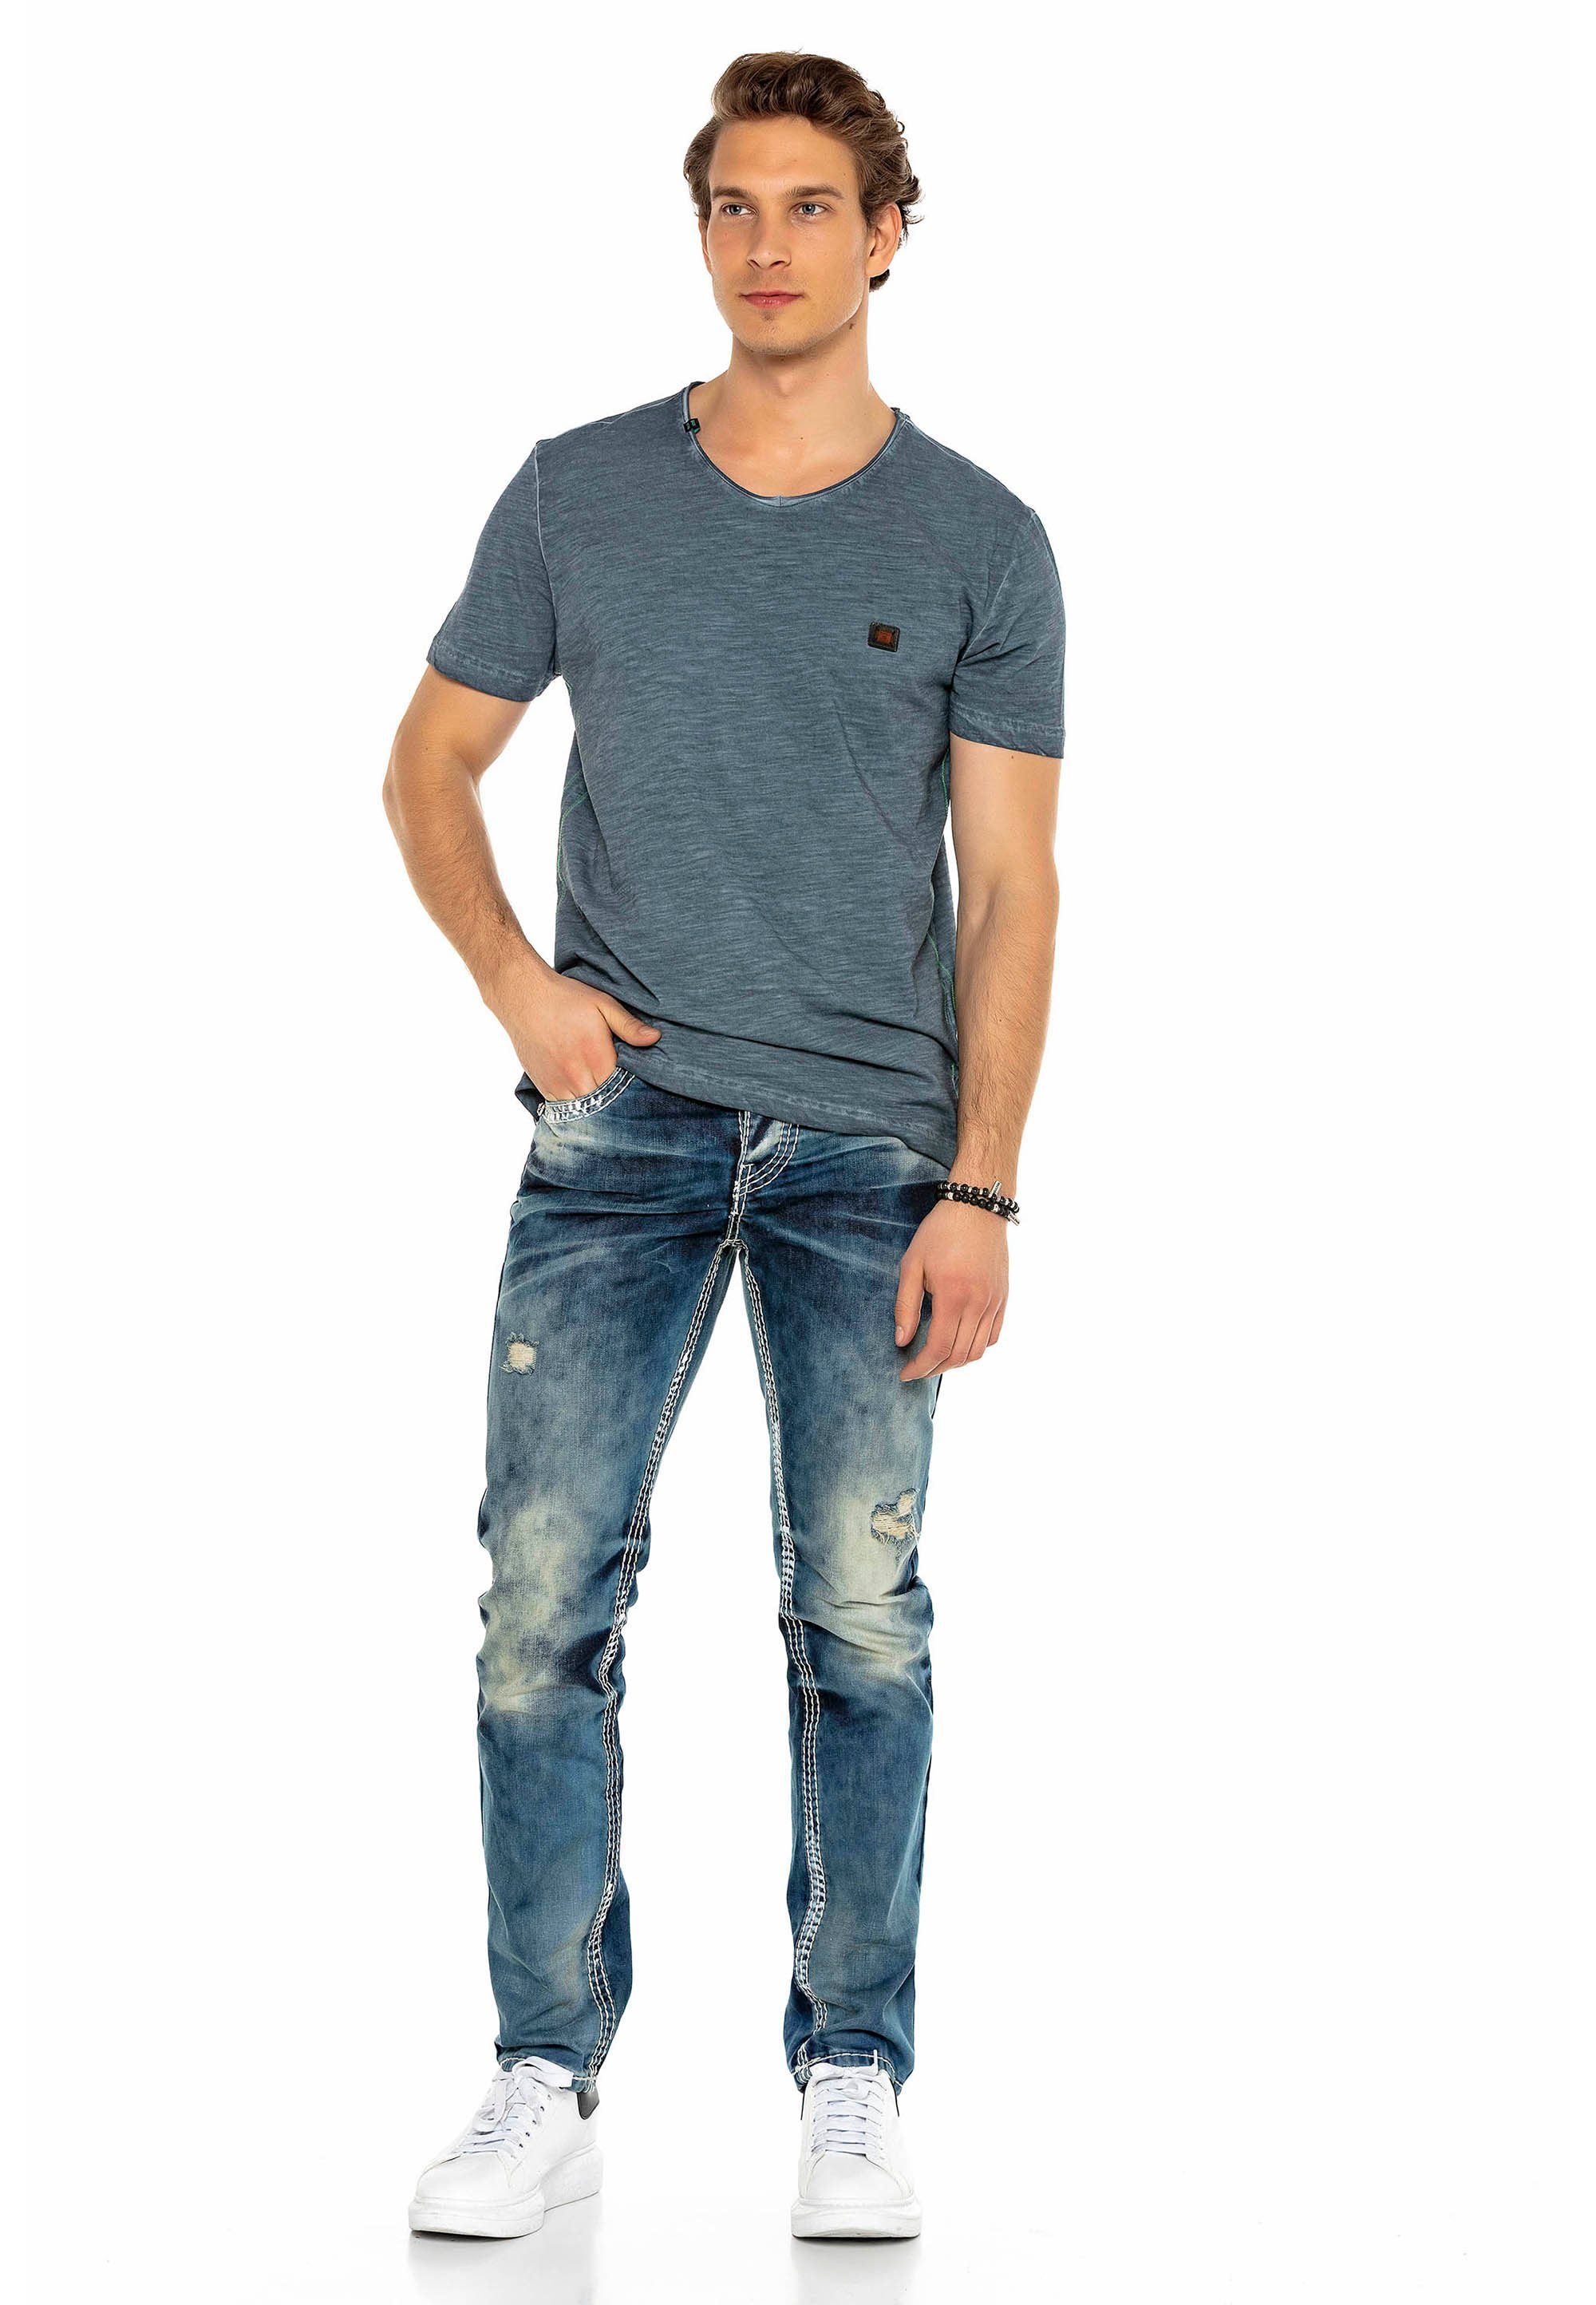 Fit & Used-Look coolen Bequeme Baxx im Cipo Jeans Straight